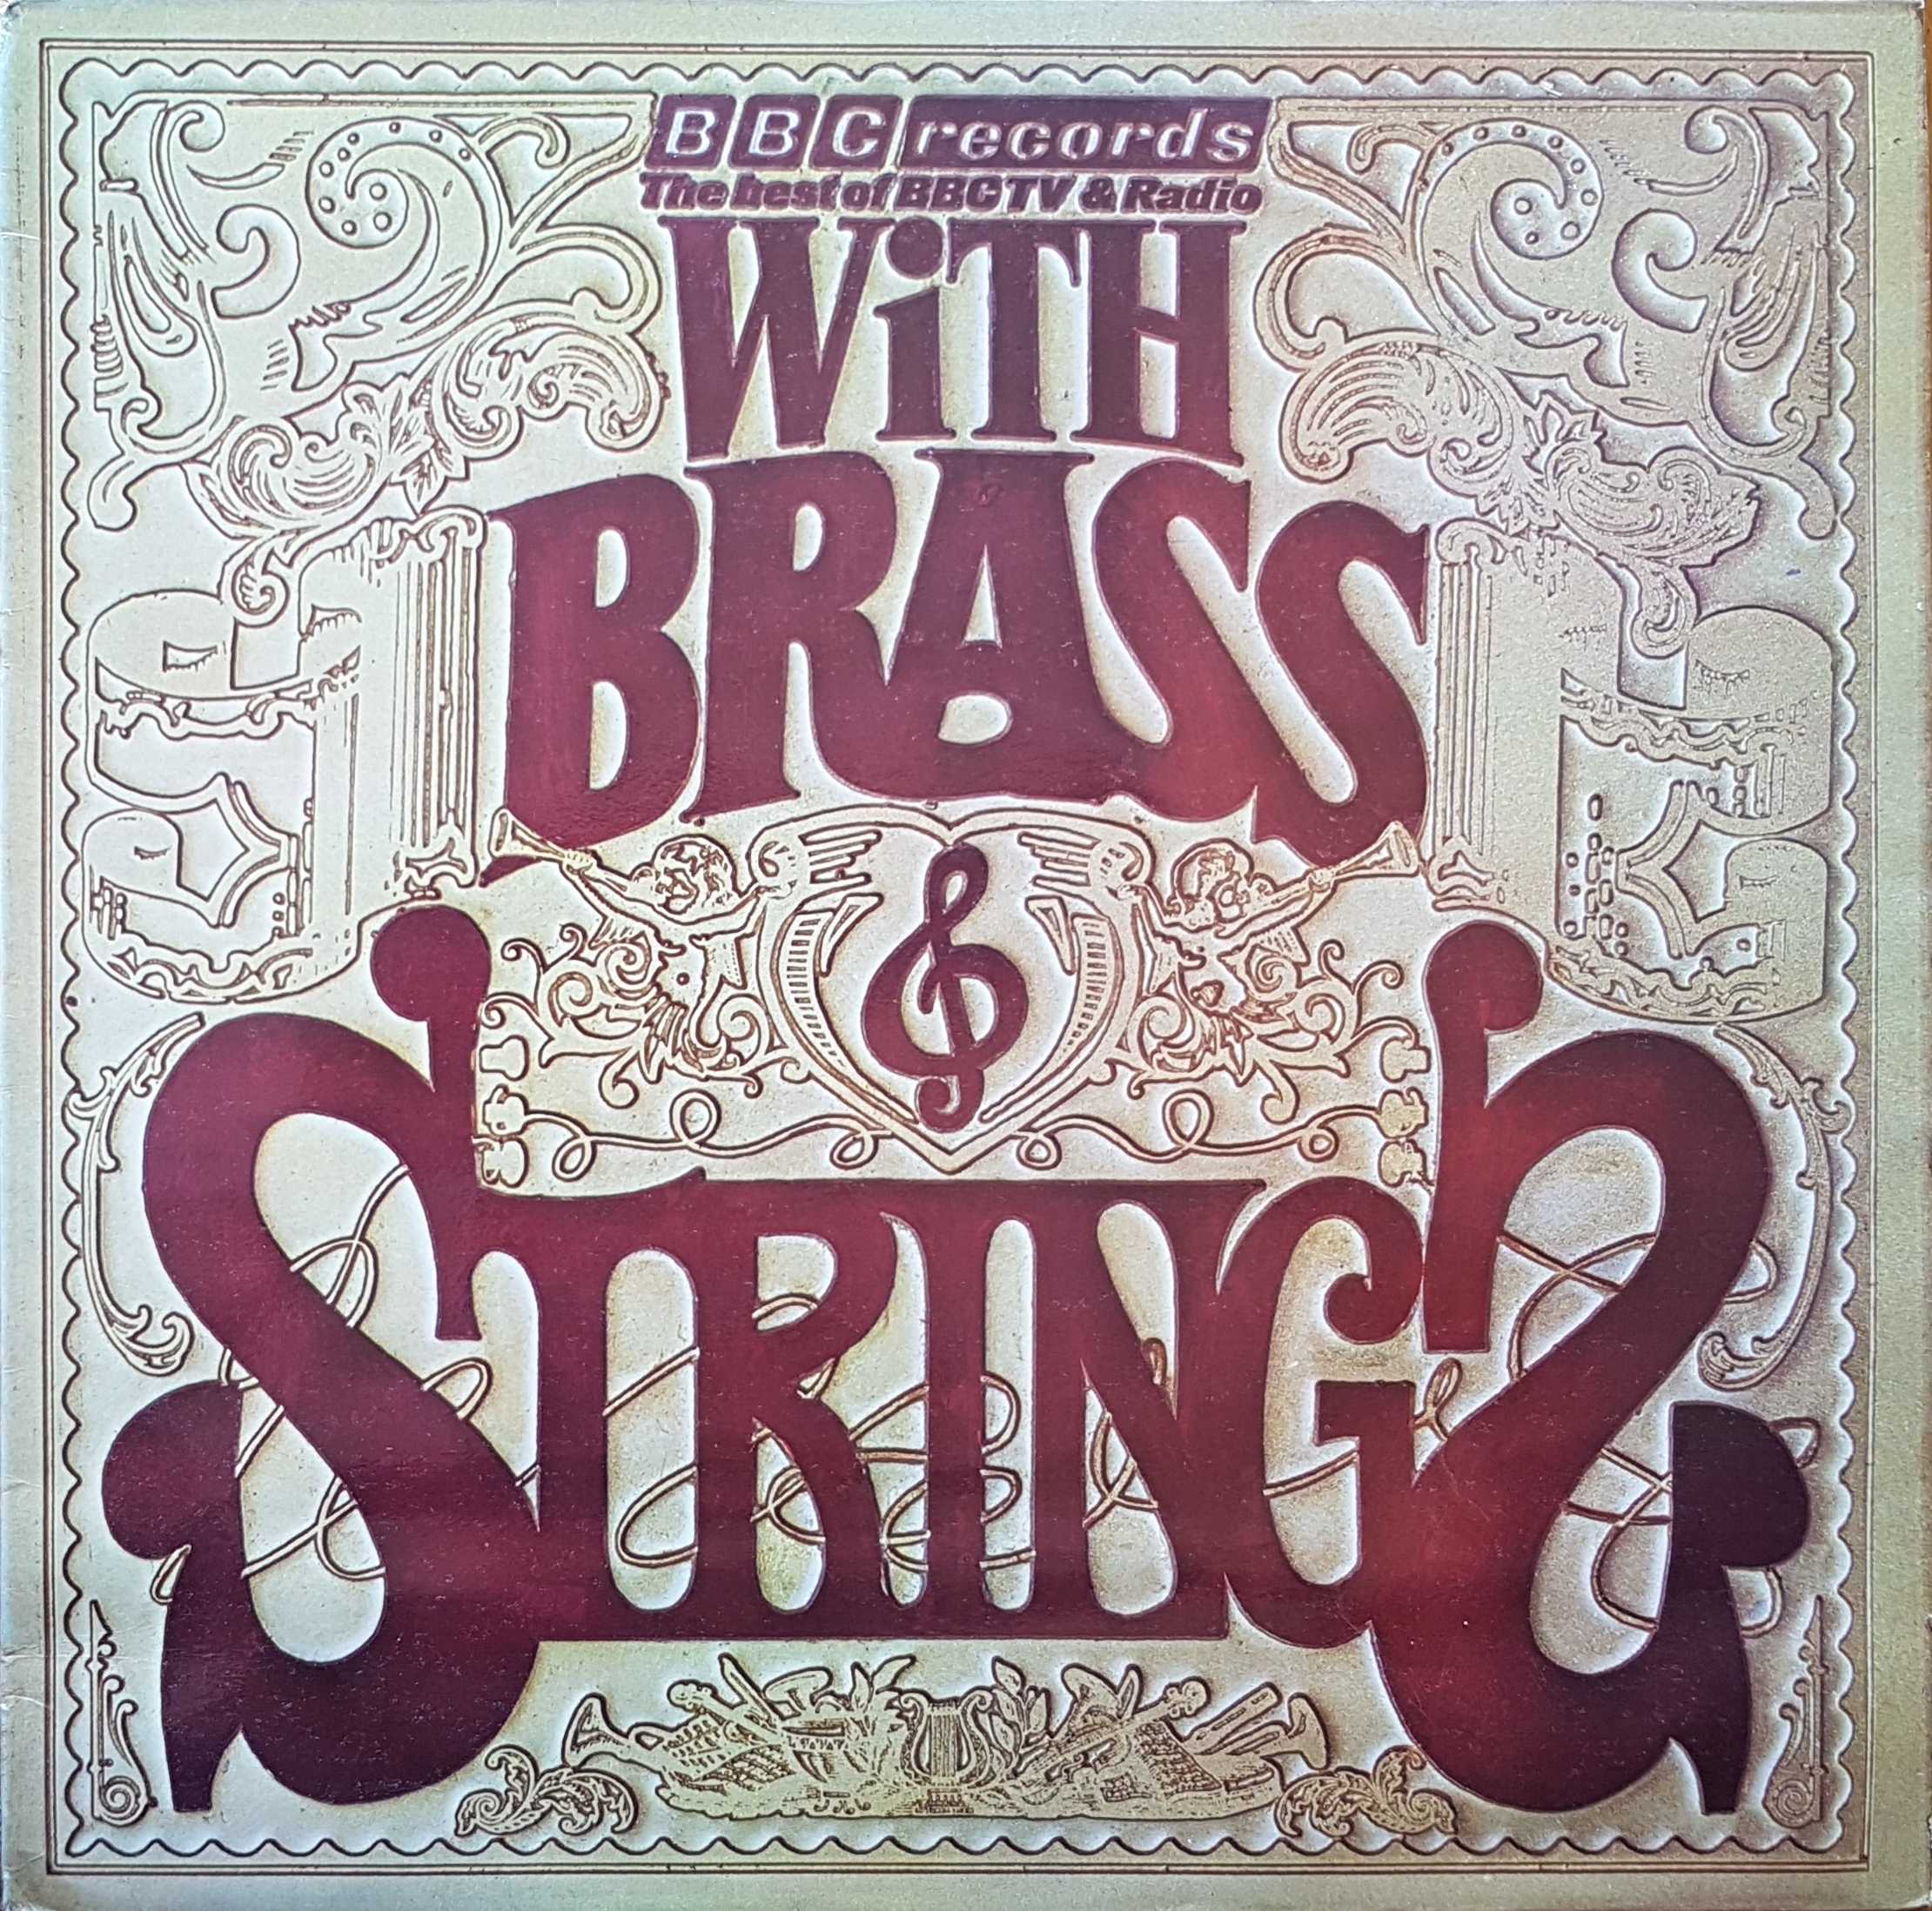 Picture of RBT 107 With brass and strings by artist Various from the BBC albums - Records and Tapes library